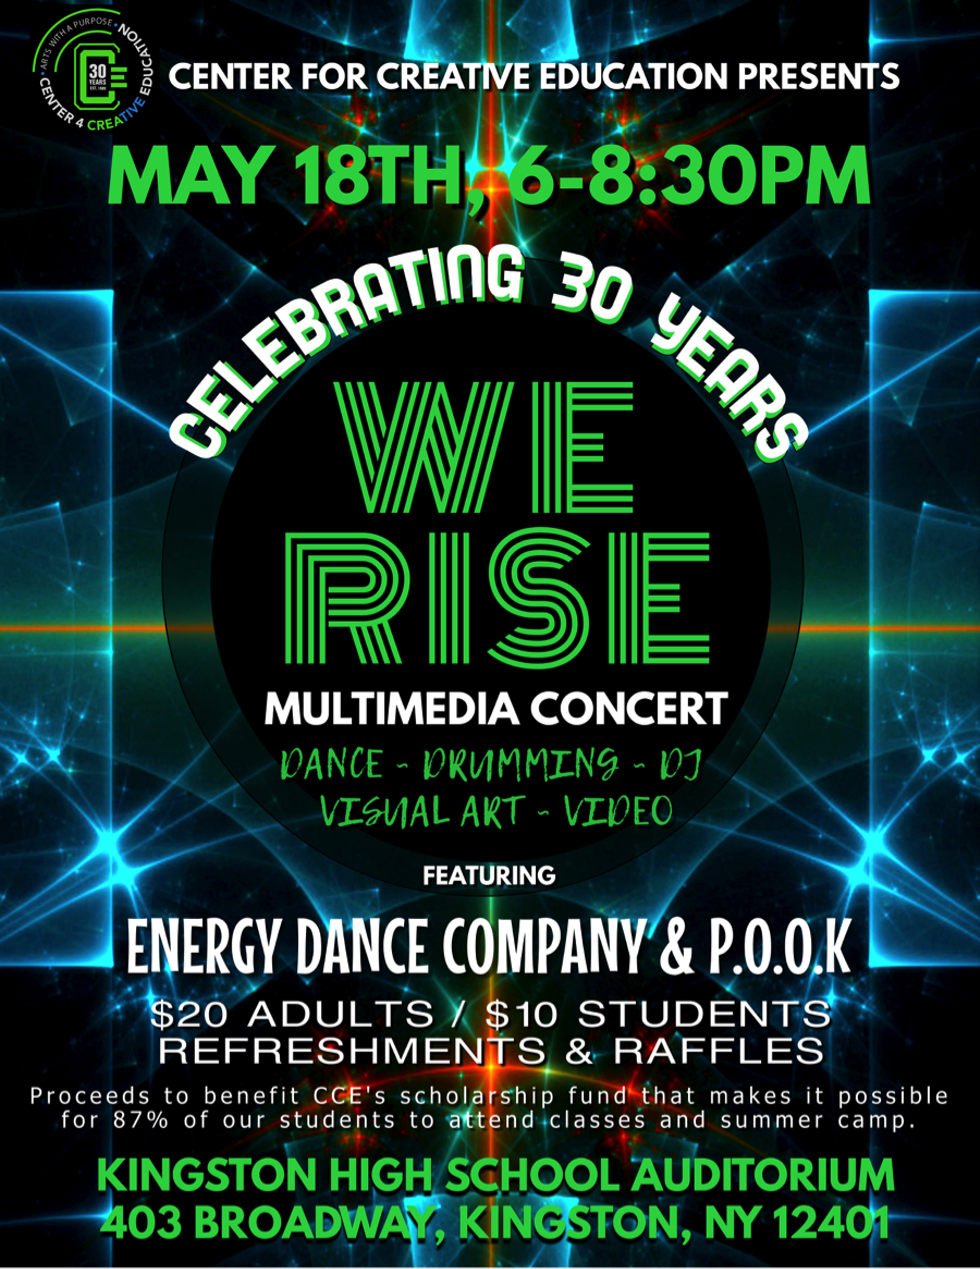 Center for Creative Education's "We Rise" Multimedia Concert